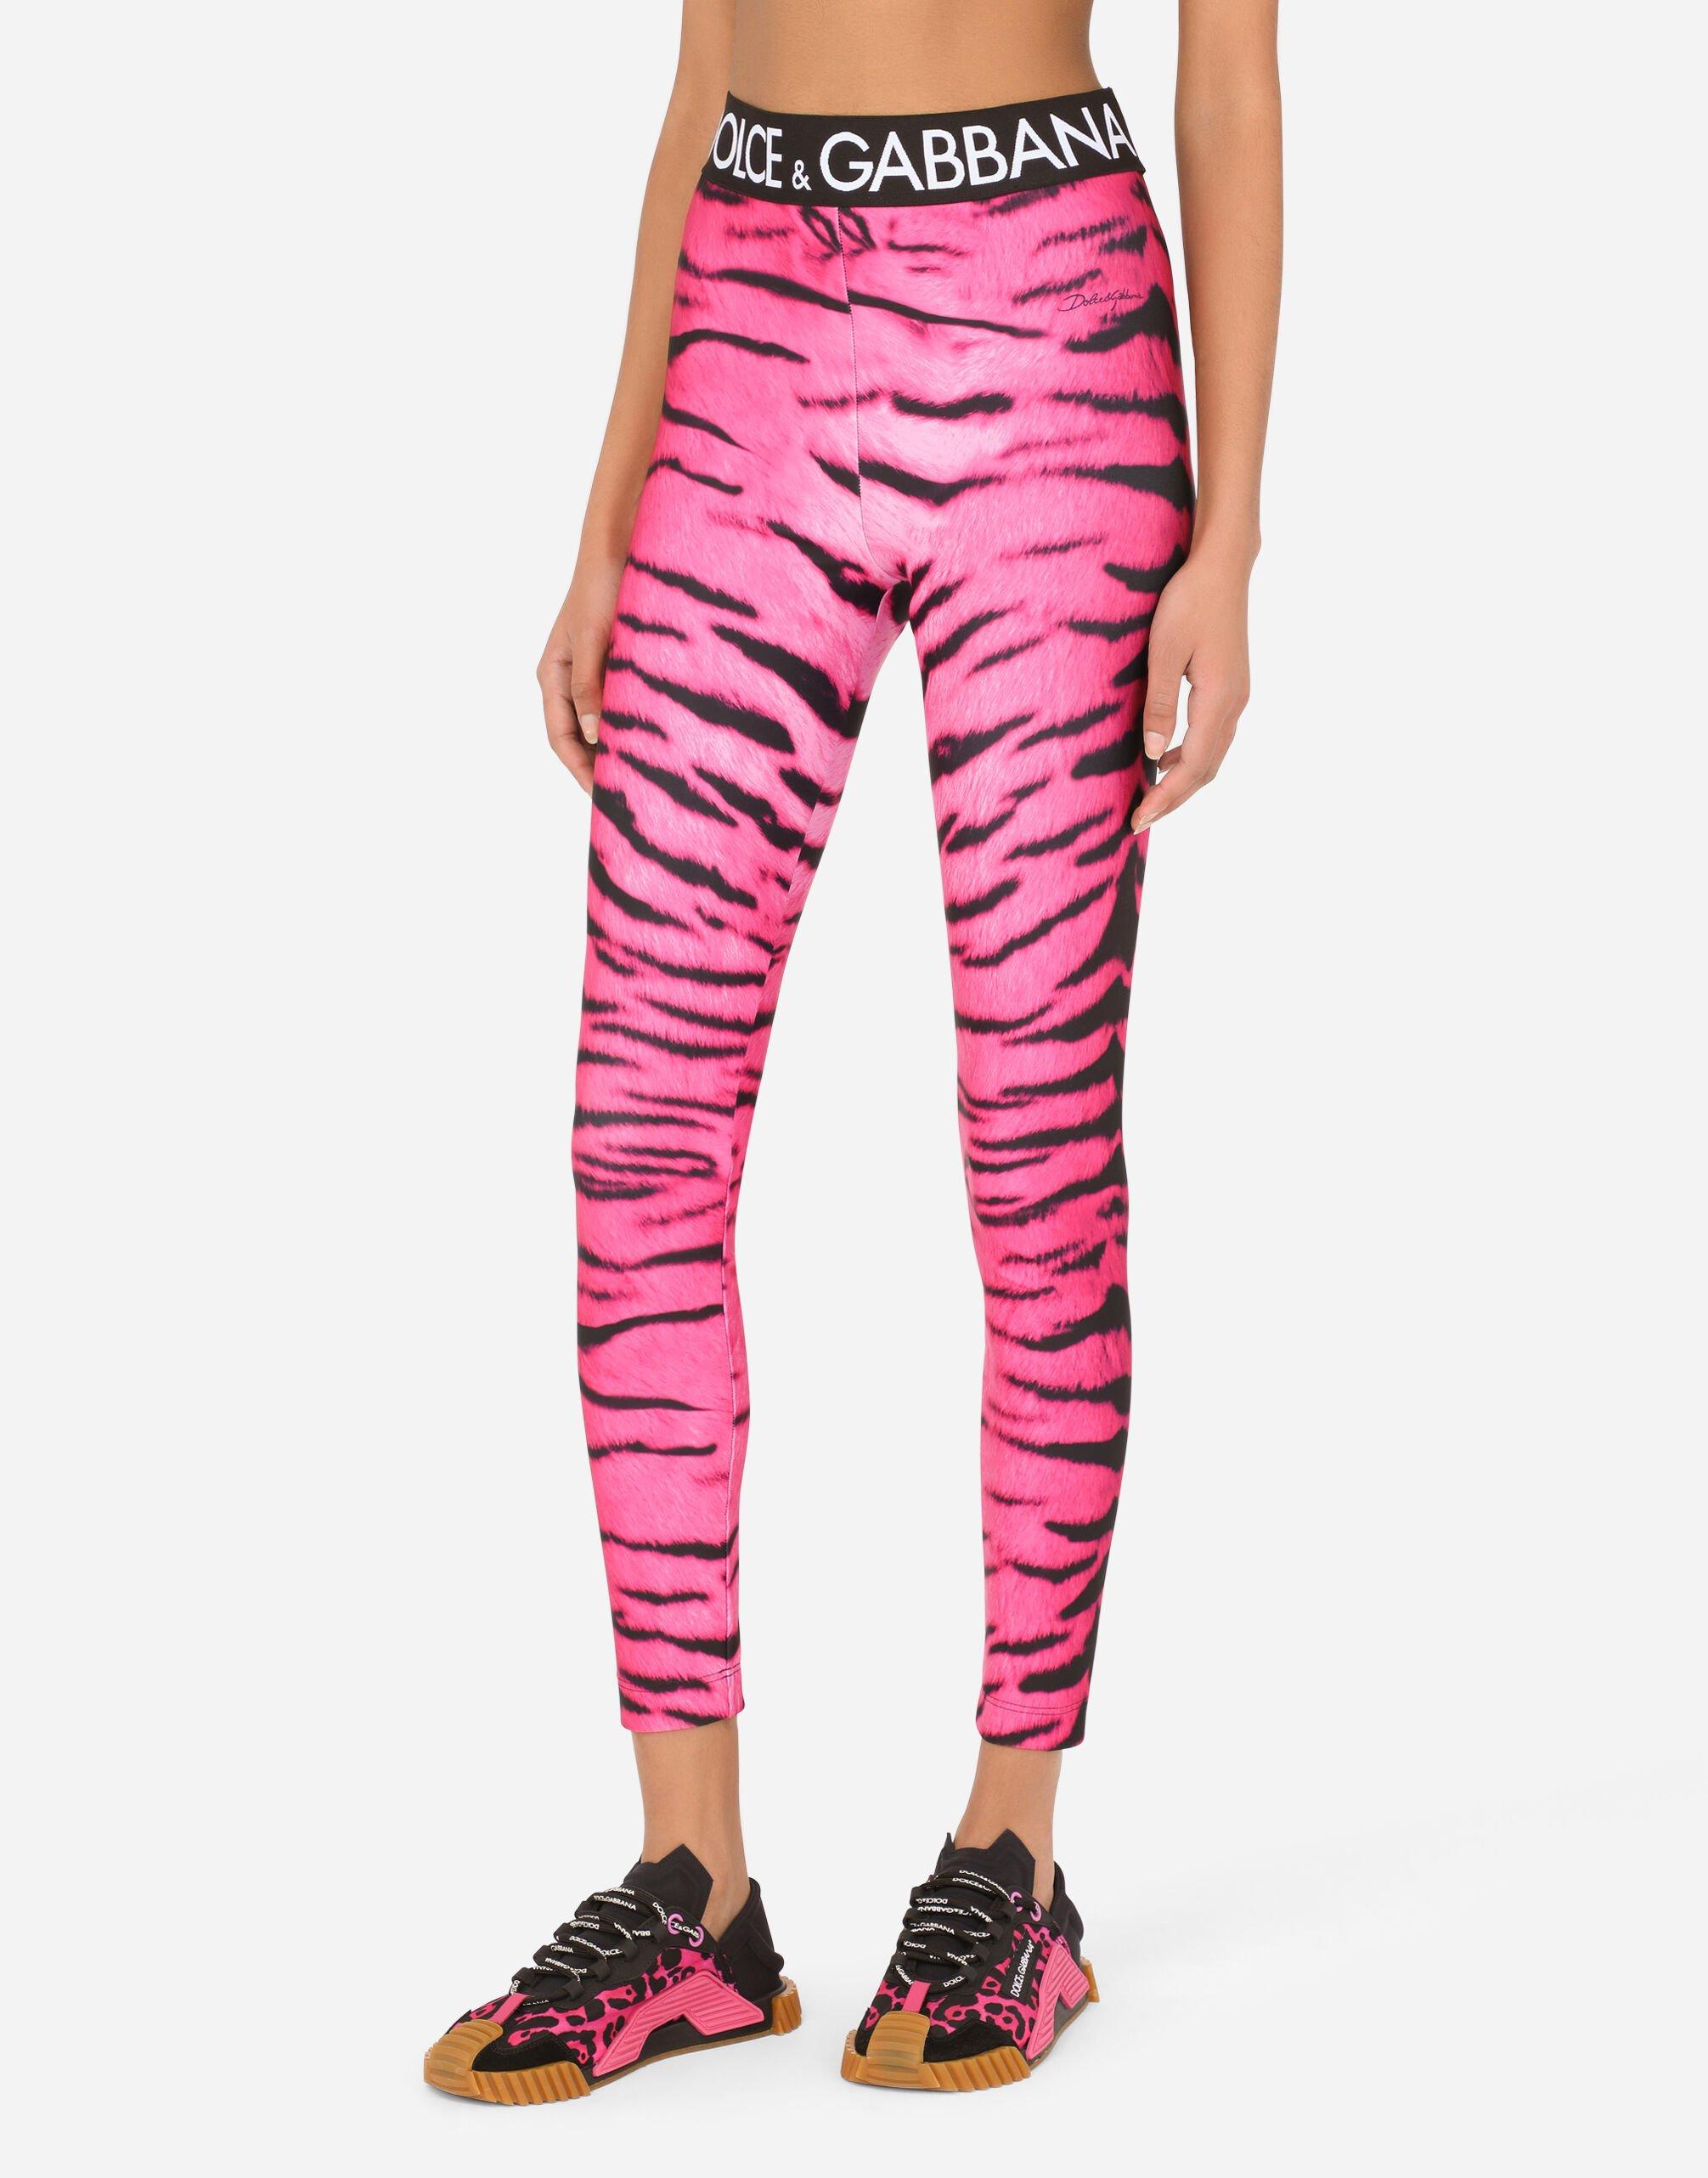 Dolce & Gabbana Run-resistant Fabric leggings With Tiger Print And